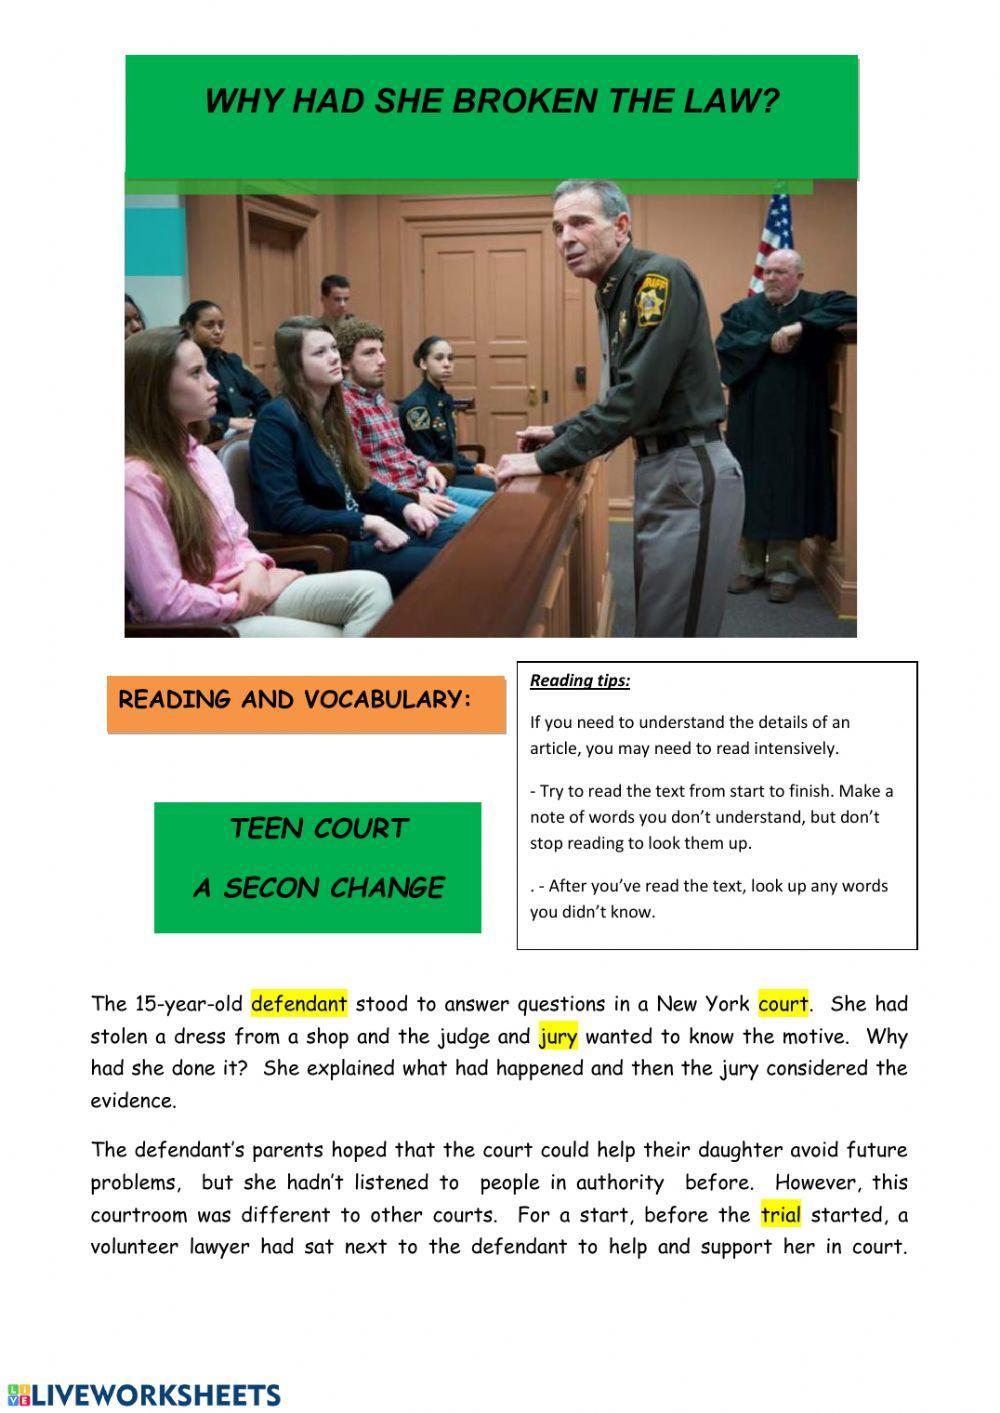 Reading Crimes - Teen Court.  A second chance